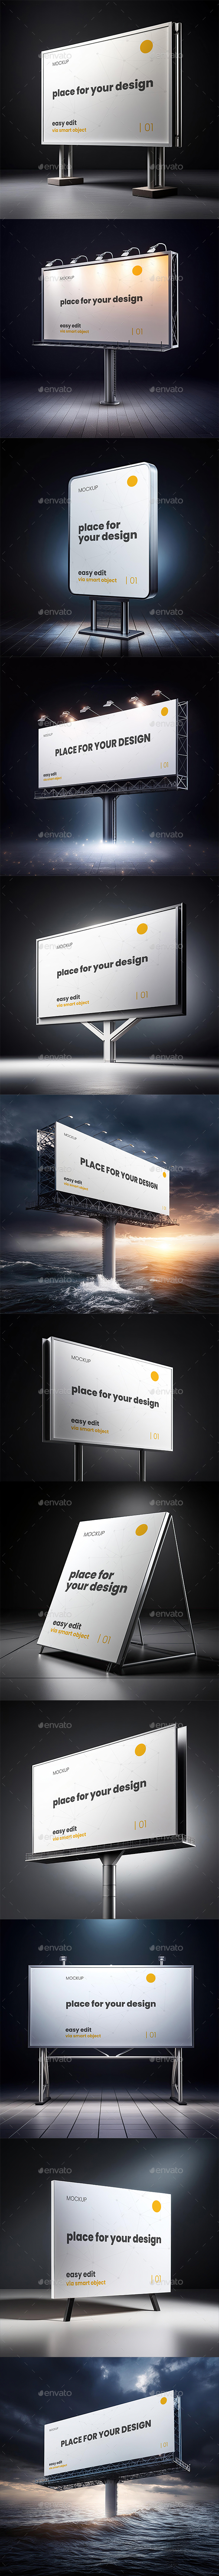 [DOWNLOAD]Billboards isolated Mockups